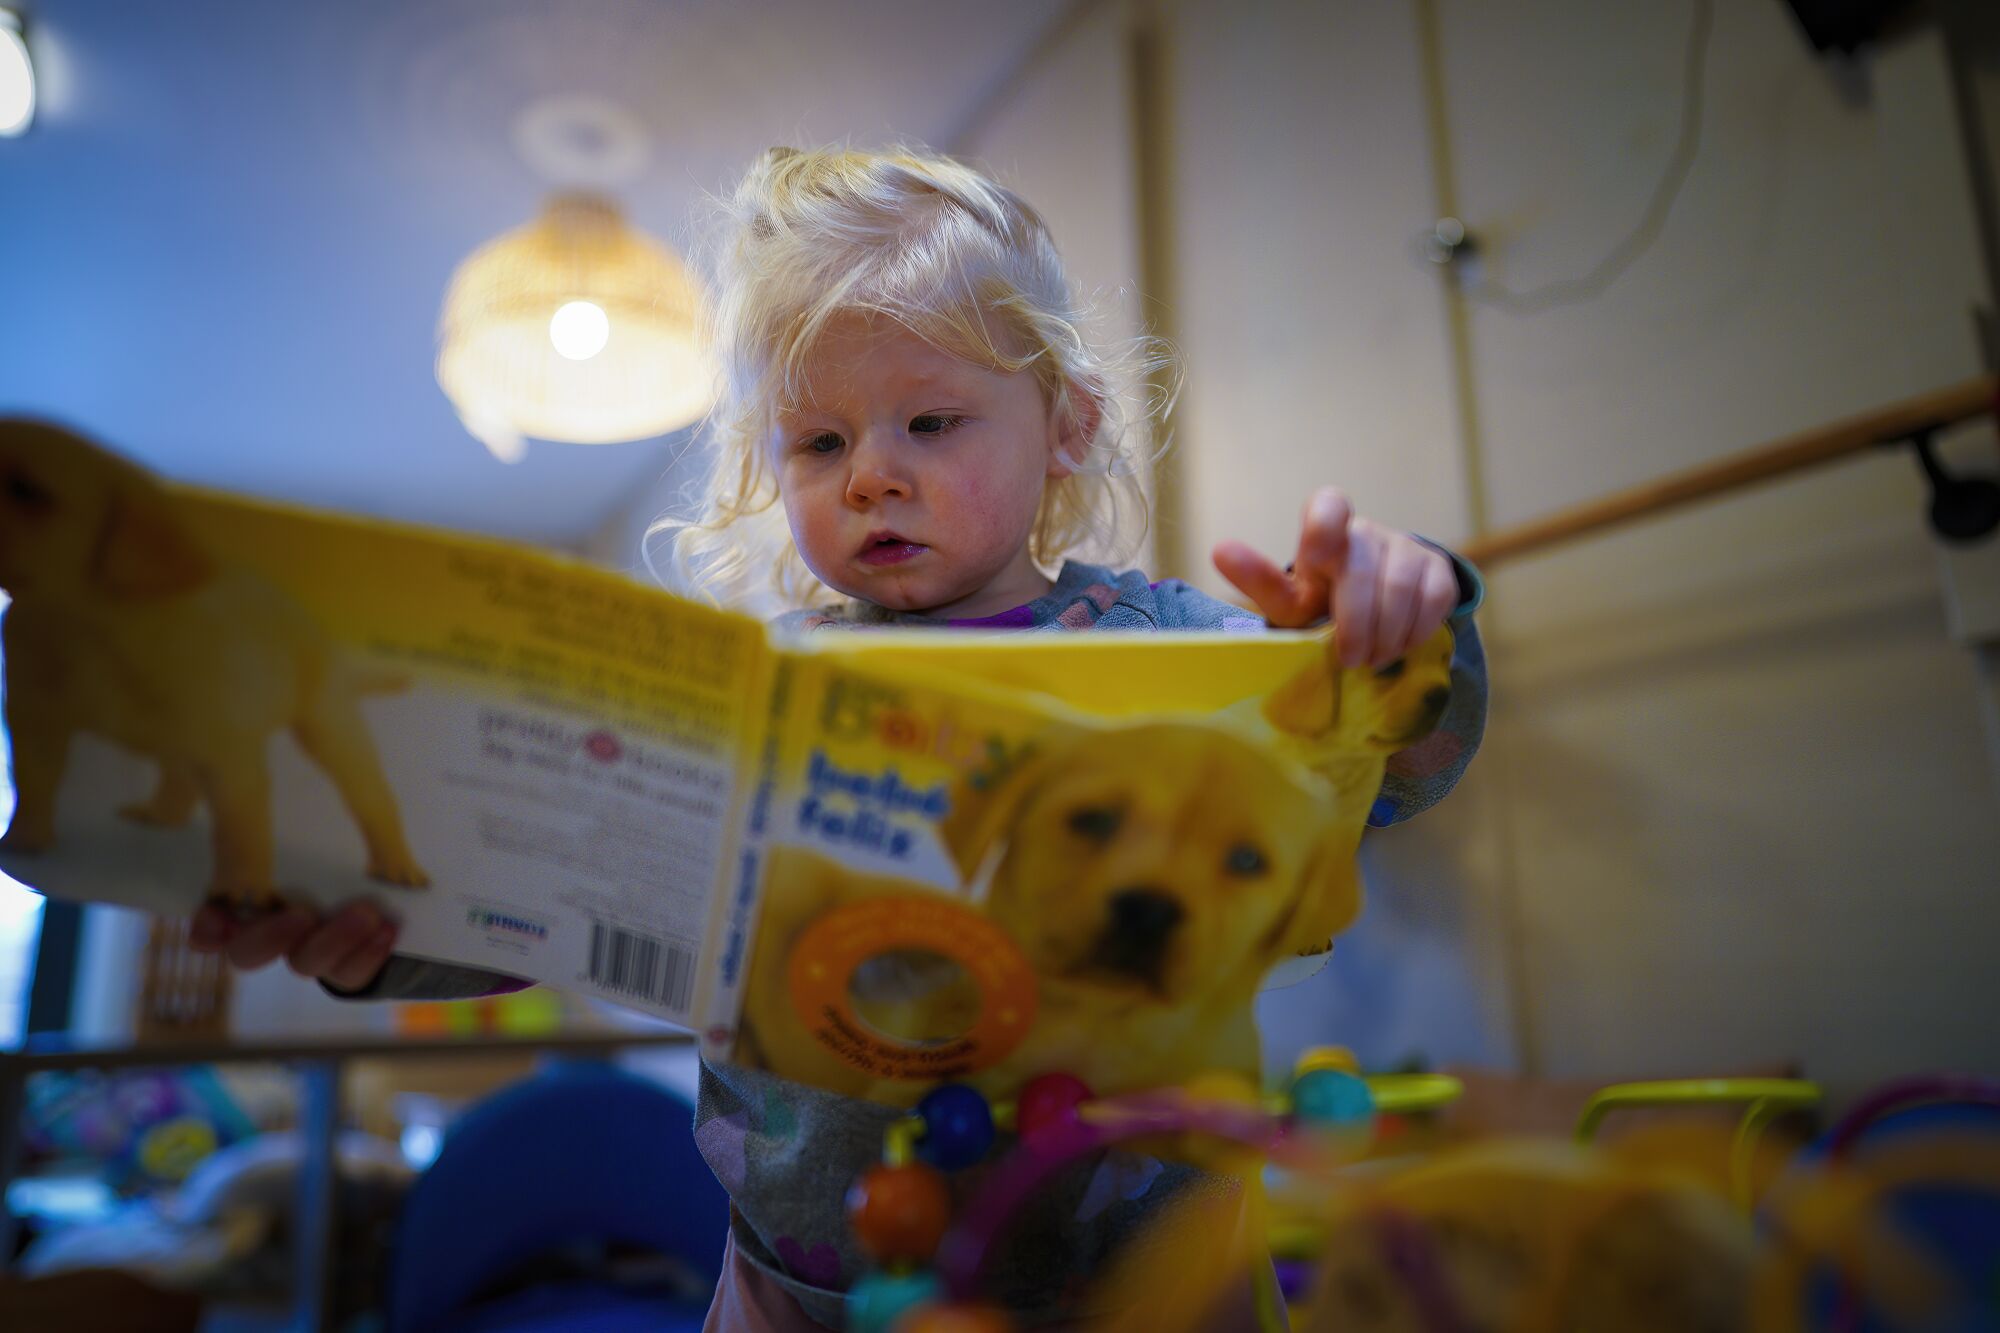 A blonde toddler turns the pages of a children's book with a dog on its cover.